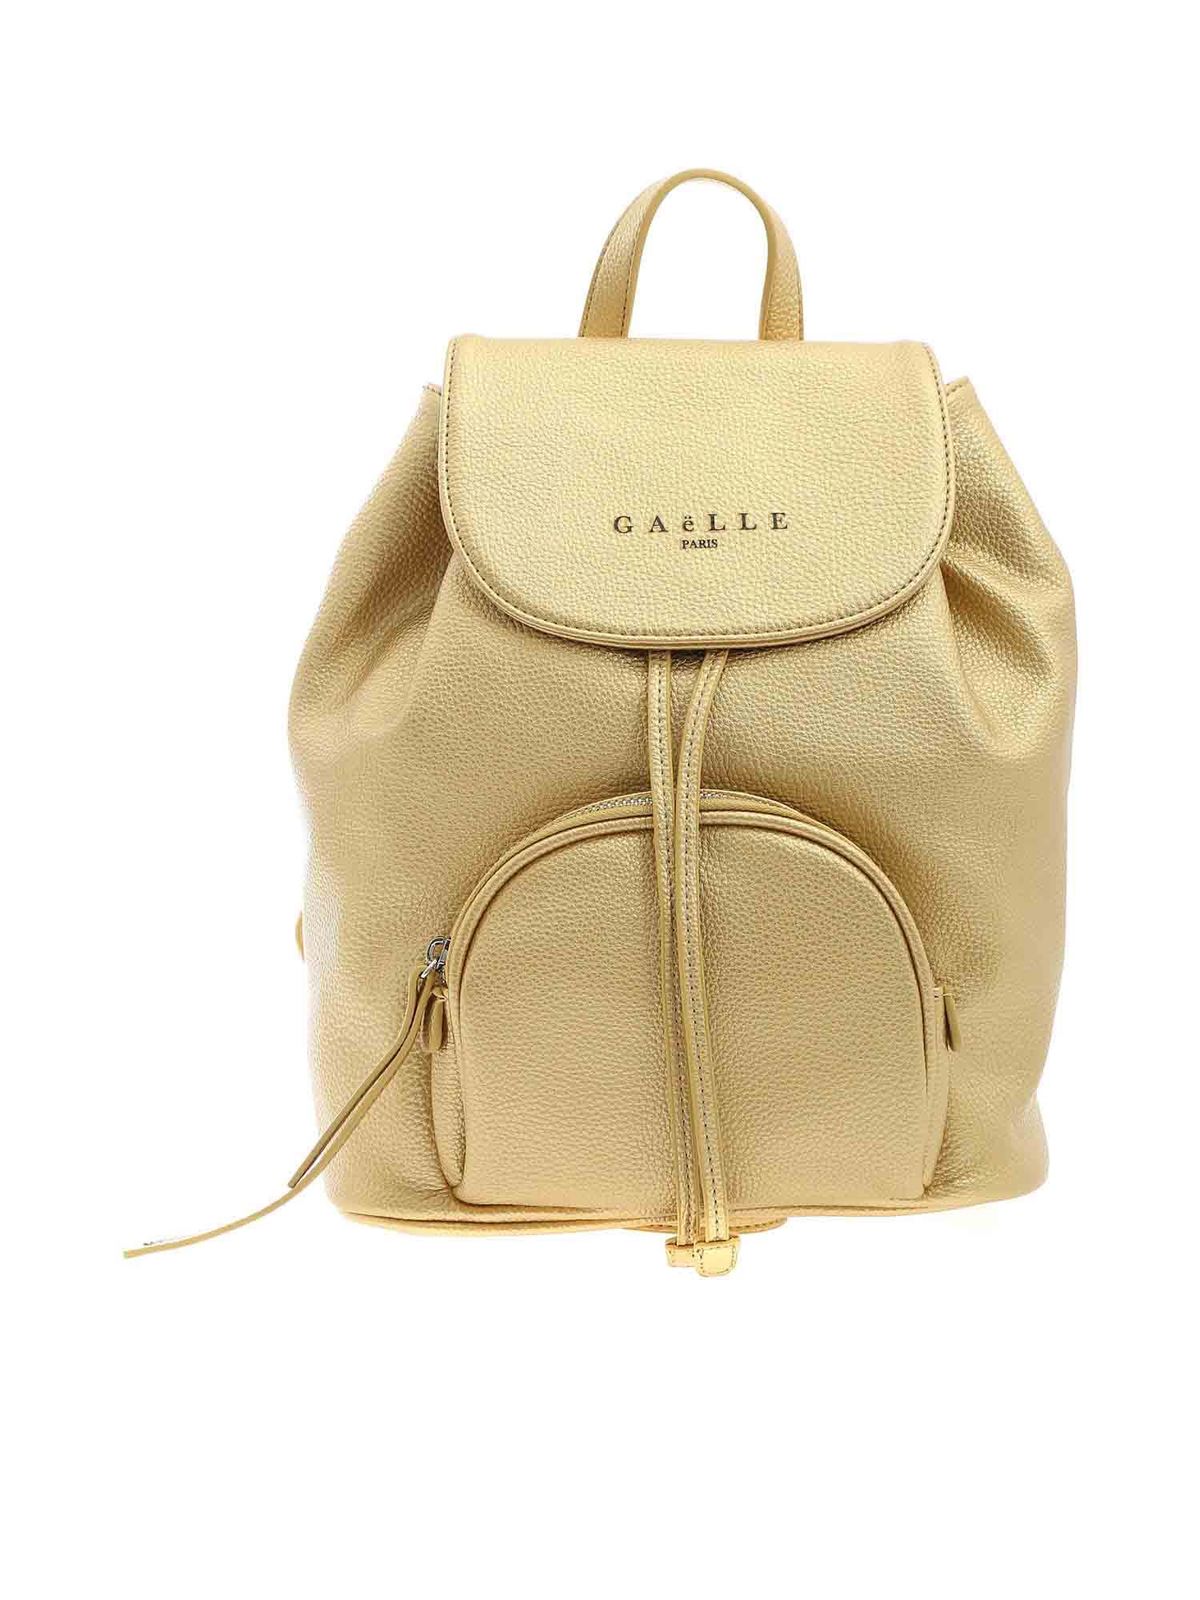 GAELLE PARIS FAUX LEATHER BACKPACK IN GOLD COLOR